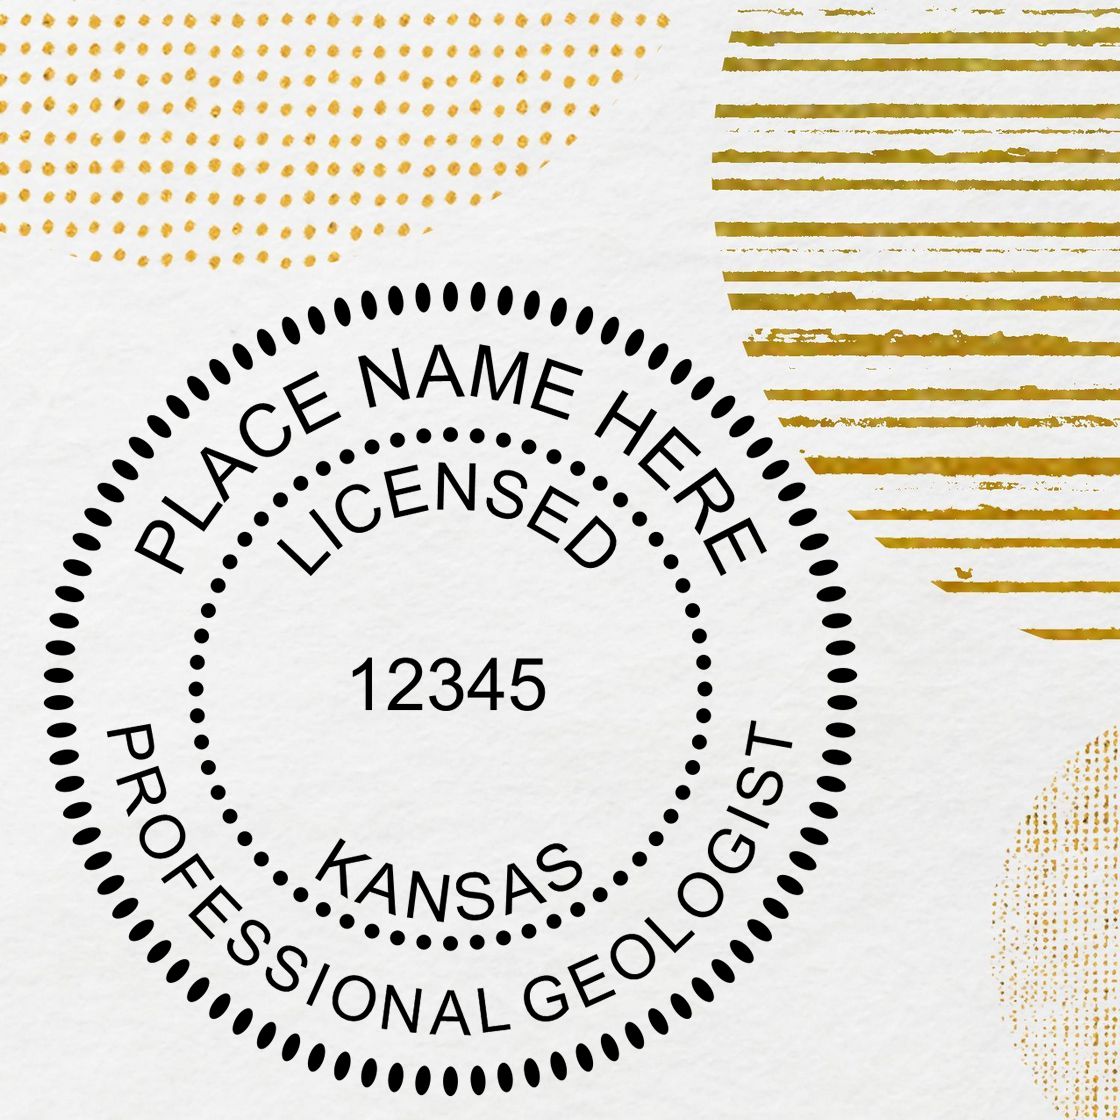 A stamped imprint of the Digital Kansas Geologist Stamp, Electronic Seal for Kansas Geologist in this stylish lifestyle photo, setting the tone for a unique and personalized product.